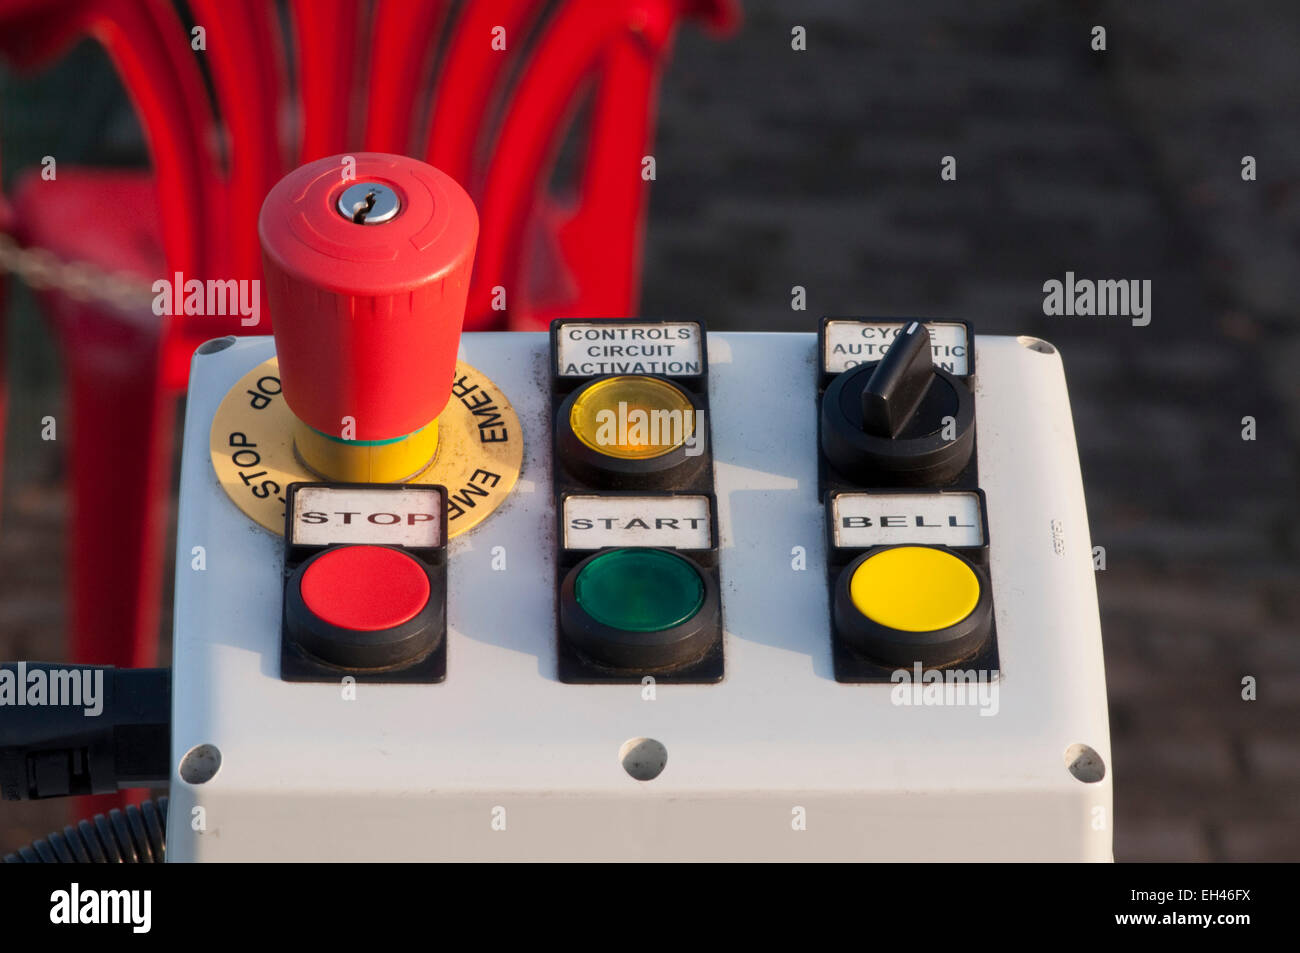 Red button. Alarm and accident. Launching a startup. A device for